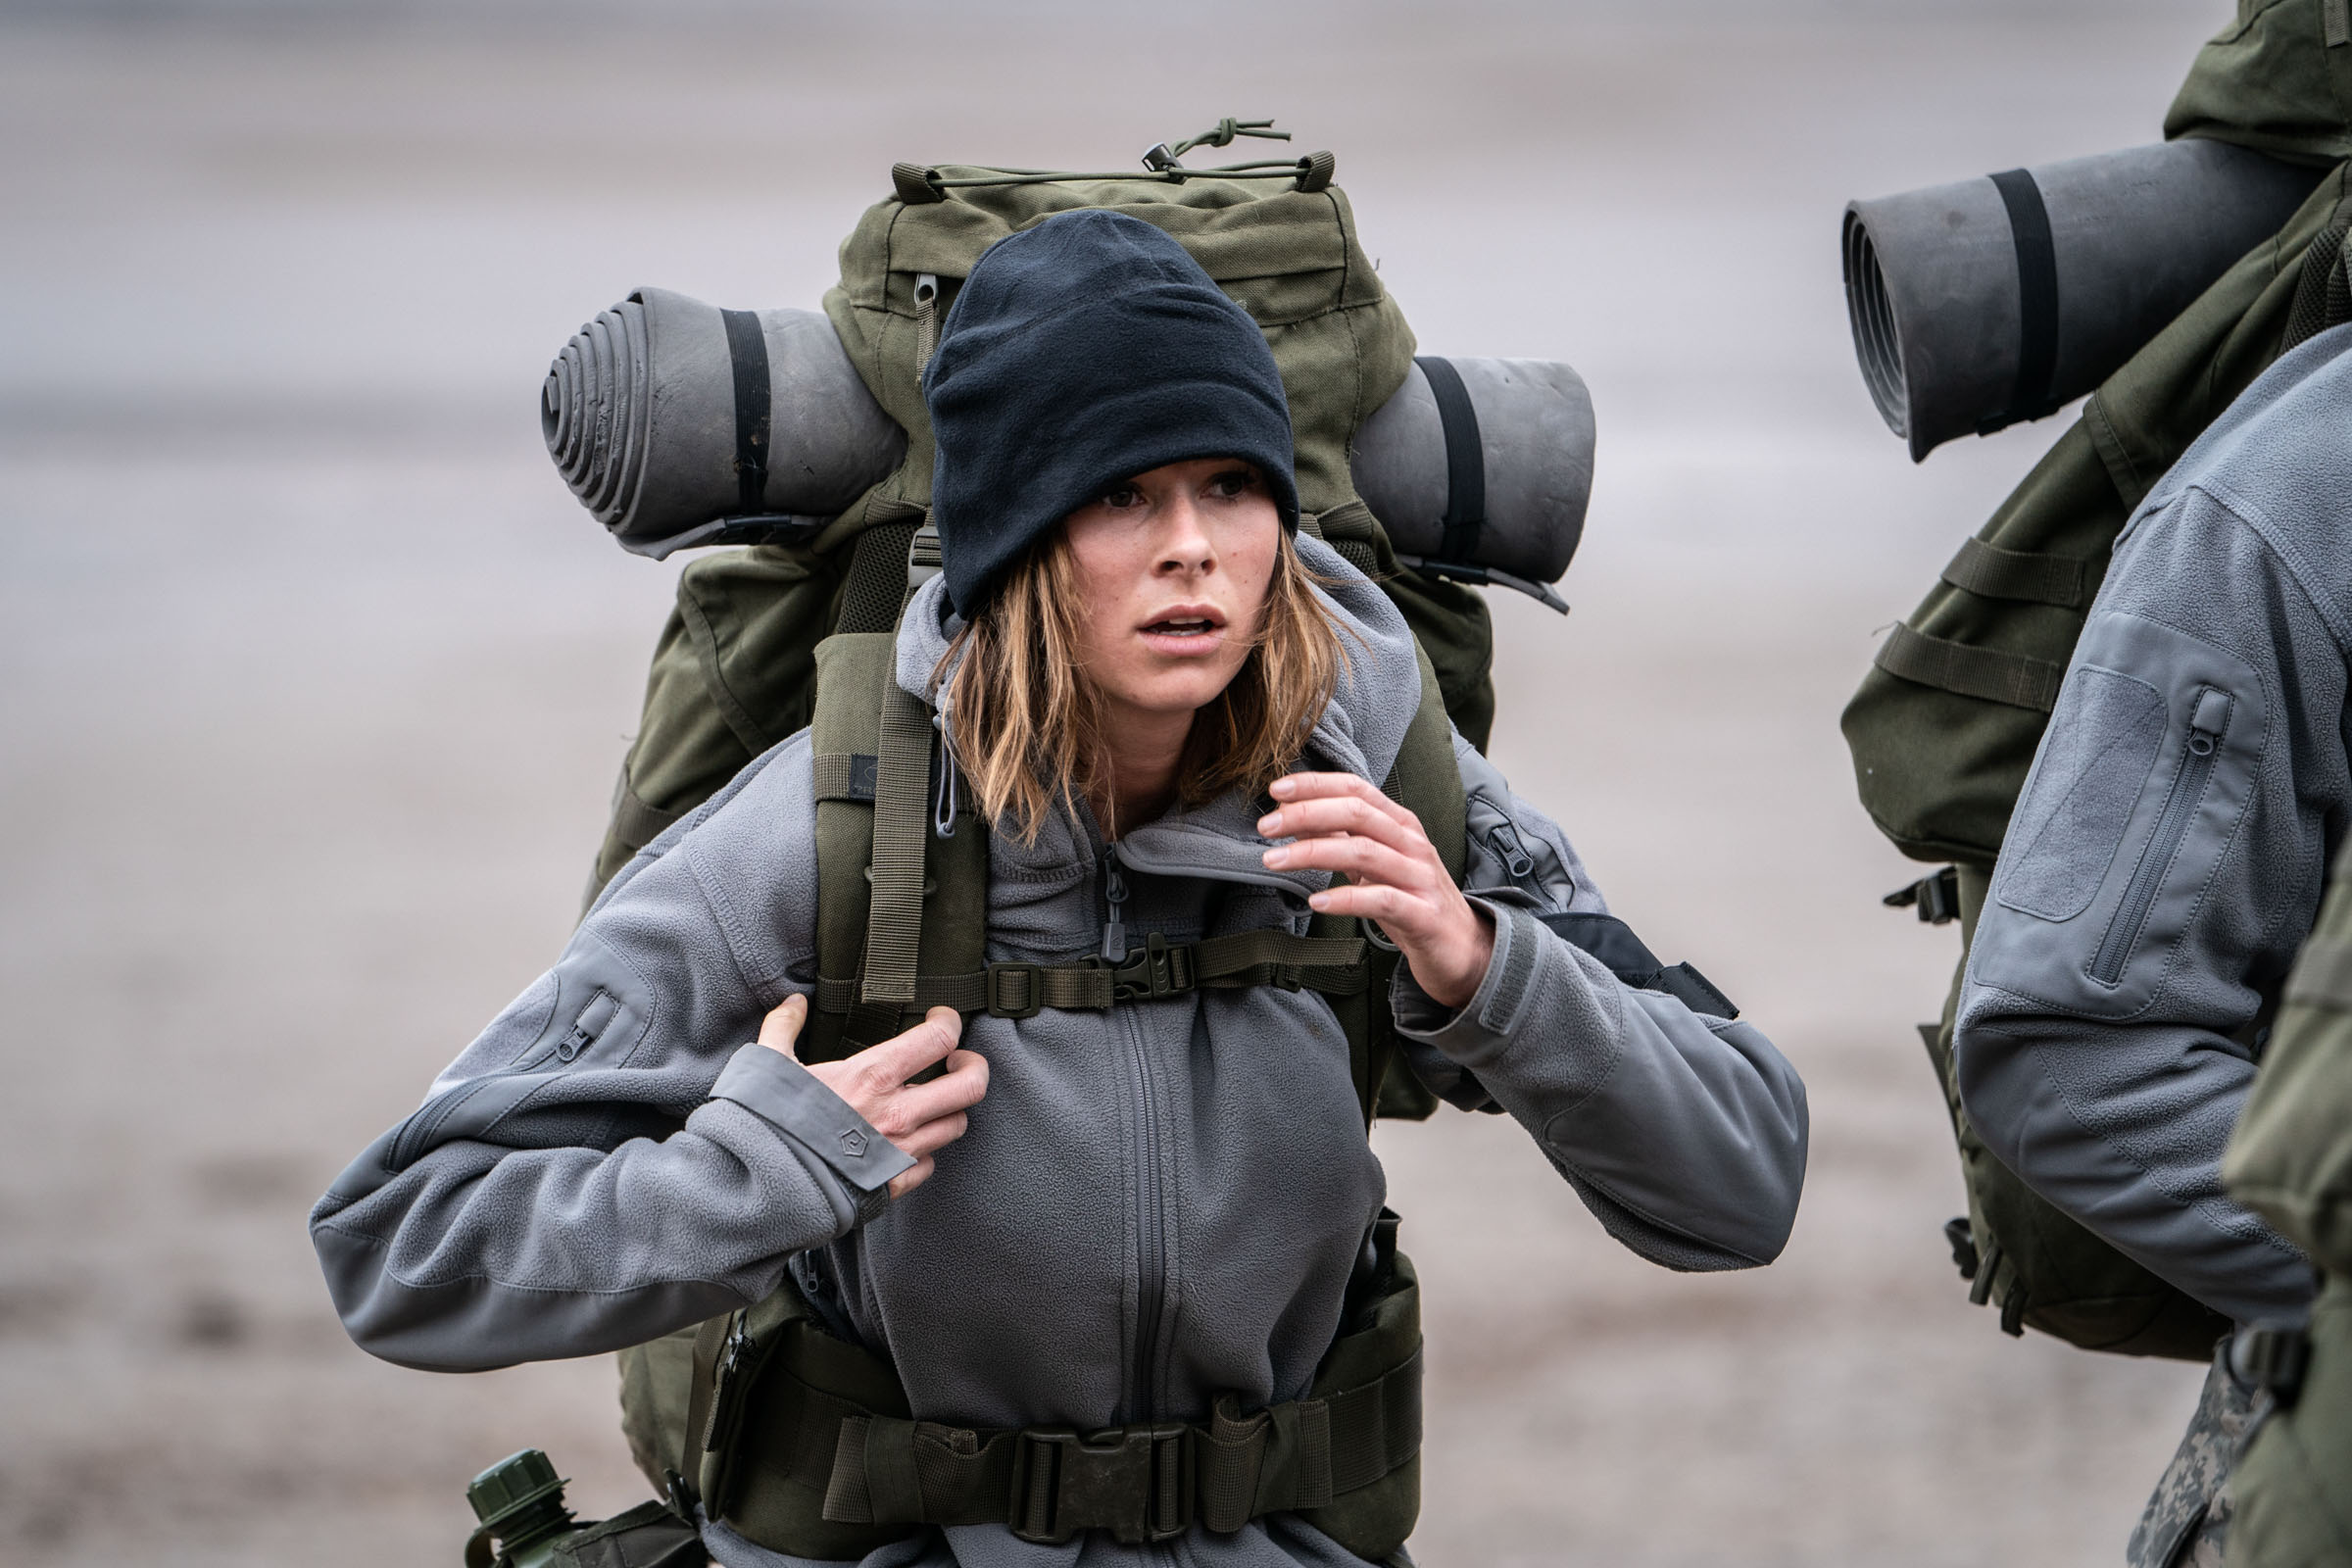  Camilla Thurlow marches to play Murderball  Episode 2  Minnow Films / Channel 4 